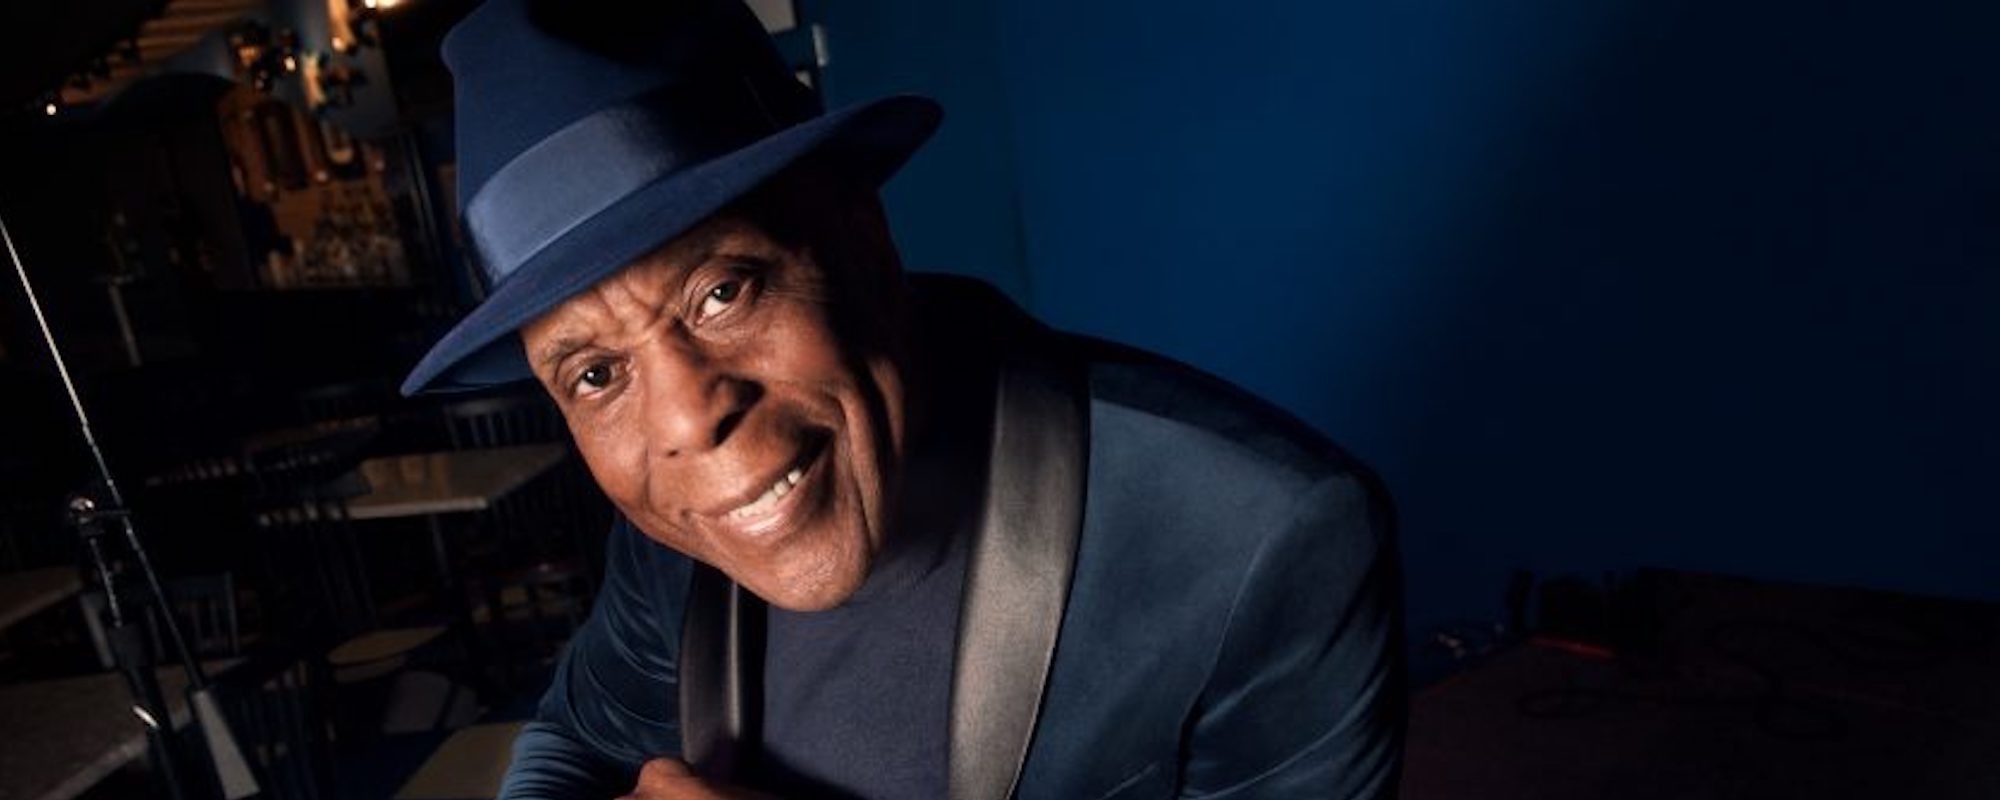 Buddy Guy Adds 13 More Tour Dates to “Farewell” Slate